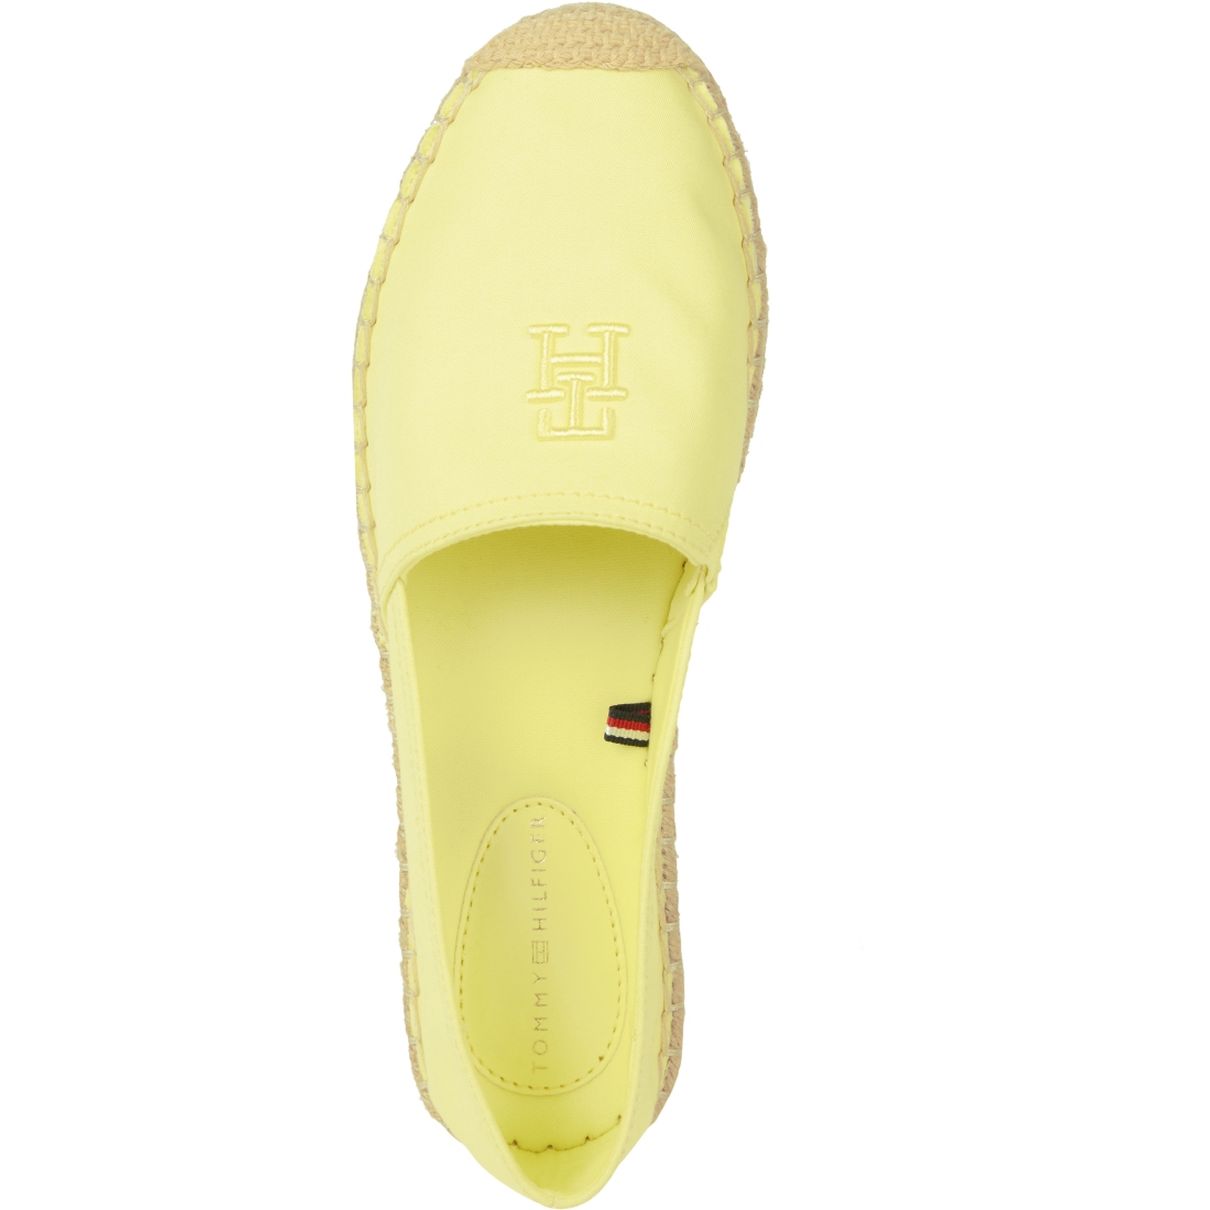 TOMMY HILFIGER loafer tipo bateliai moterims, Geltona, Embroidered flat espadrille